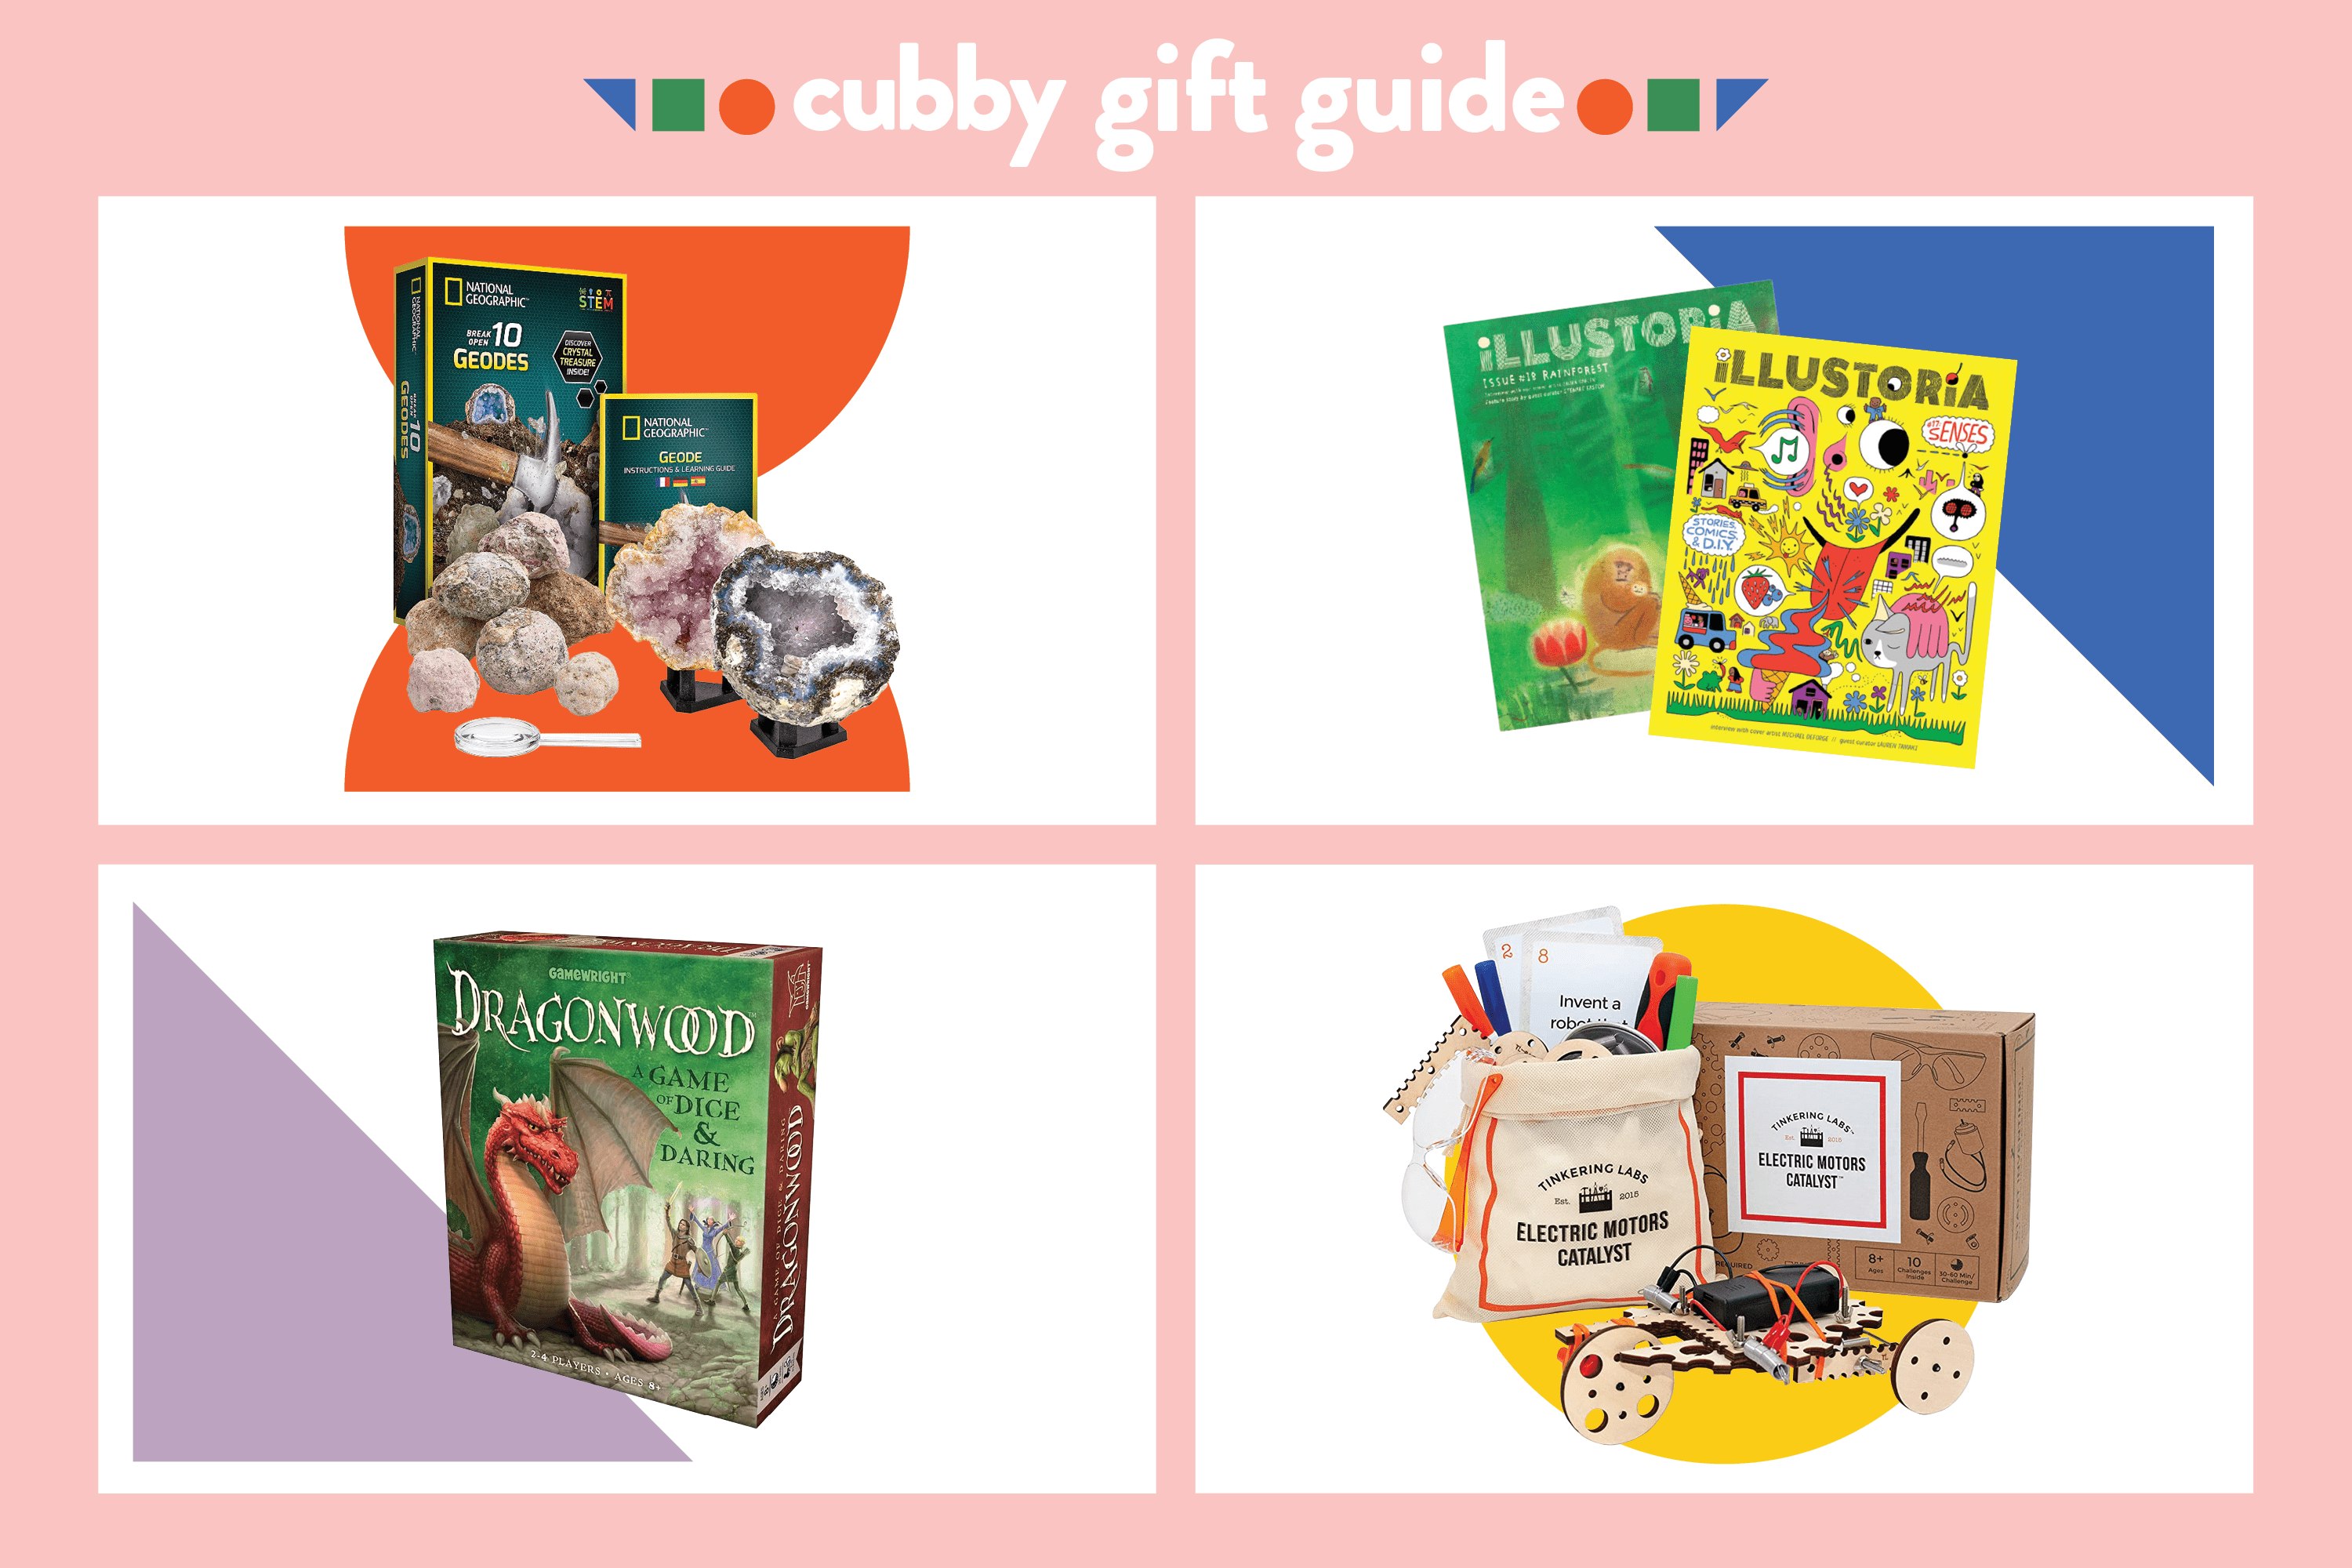 The Only Gift Guide for an 8-Year-Old You'll Ever Need